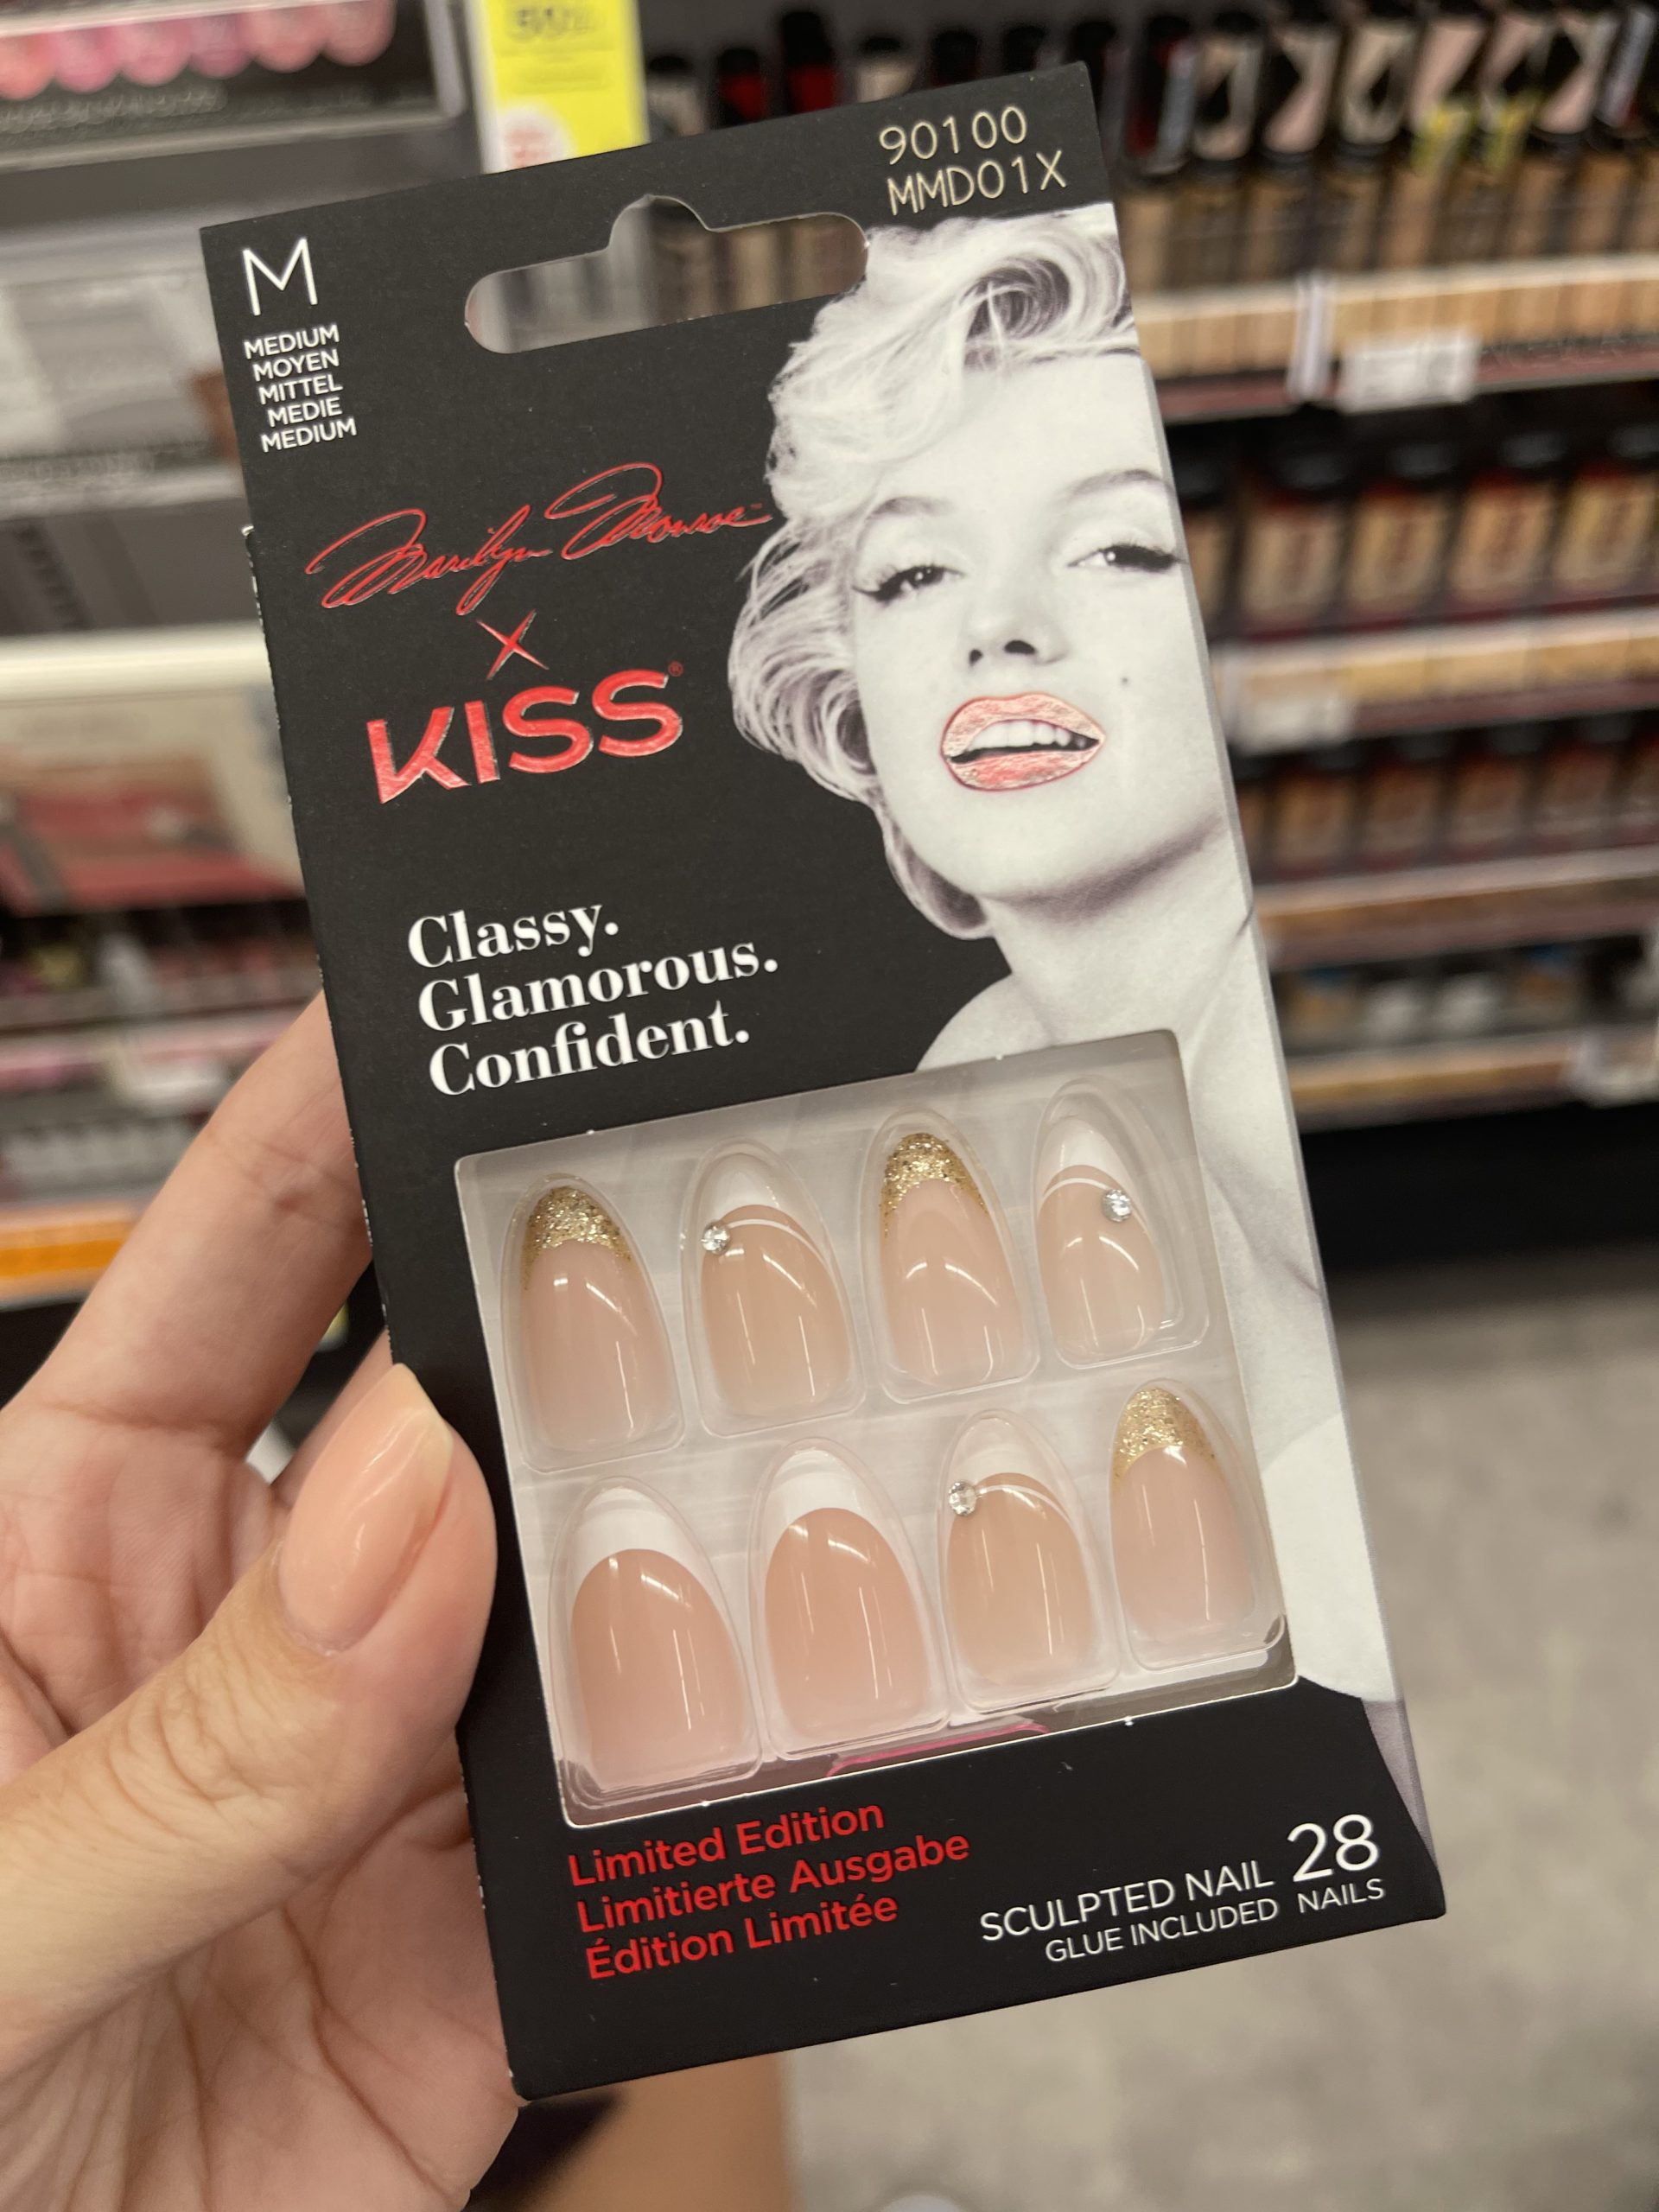 Marilyn Monroe x Kiss press on fingernails with a french manicure style, diamond embellishments and limited edition packaging with Marilyn Monroe on the box